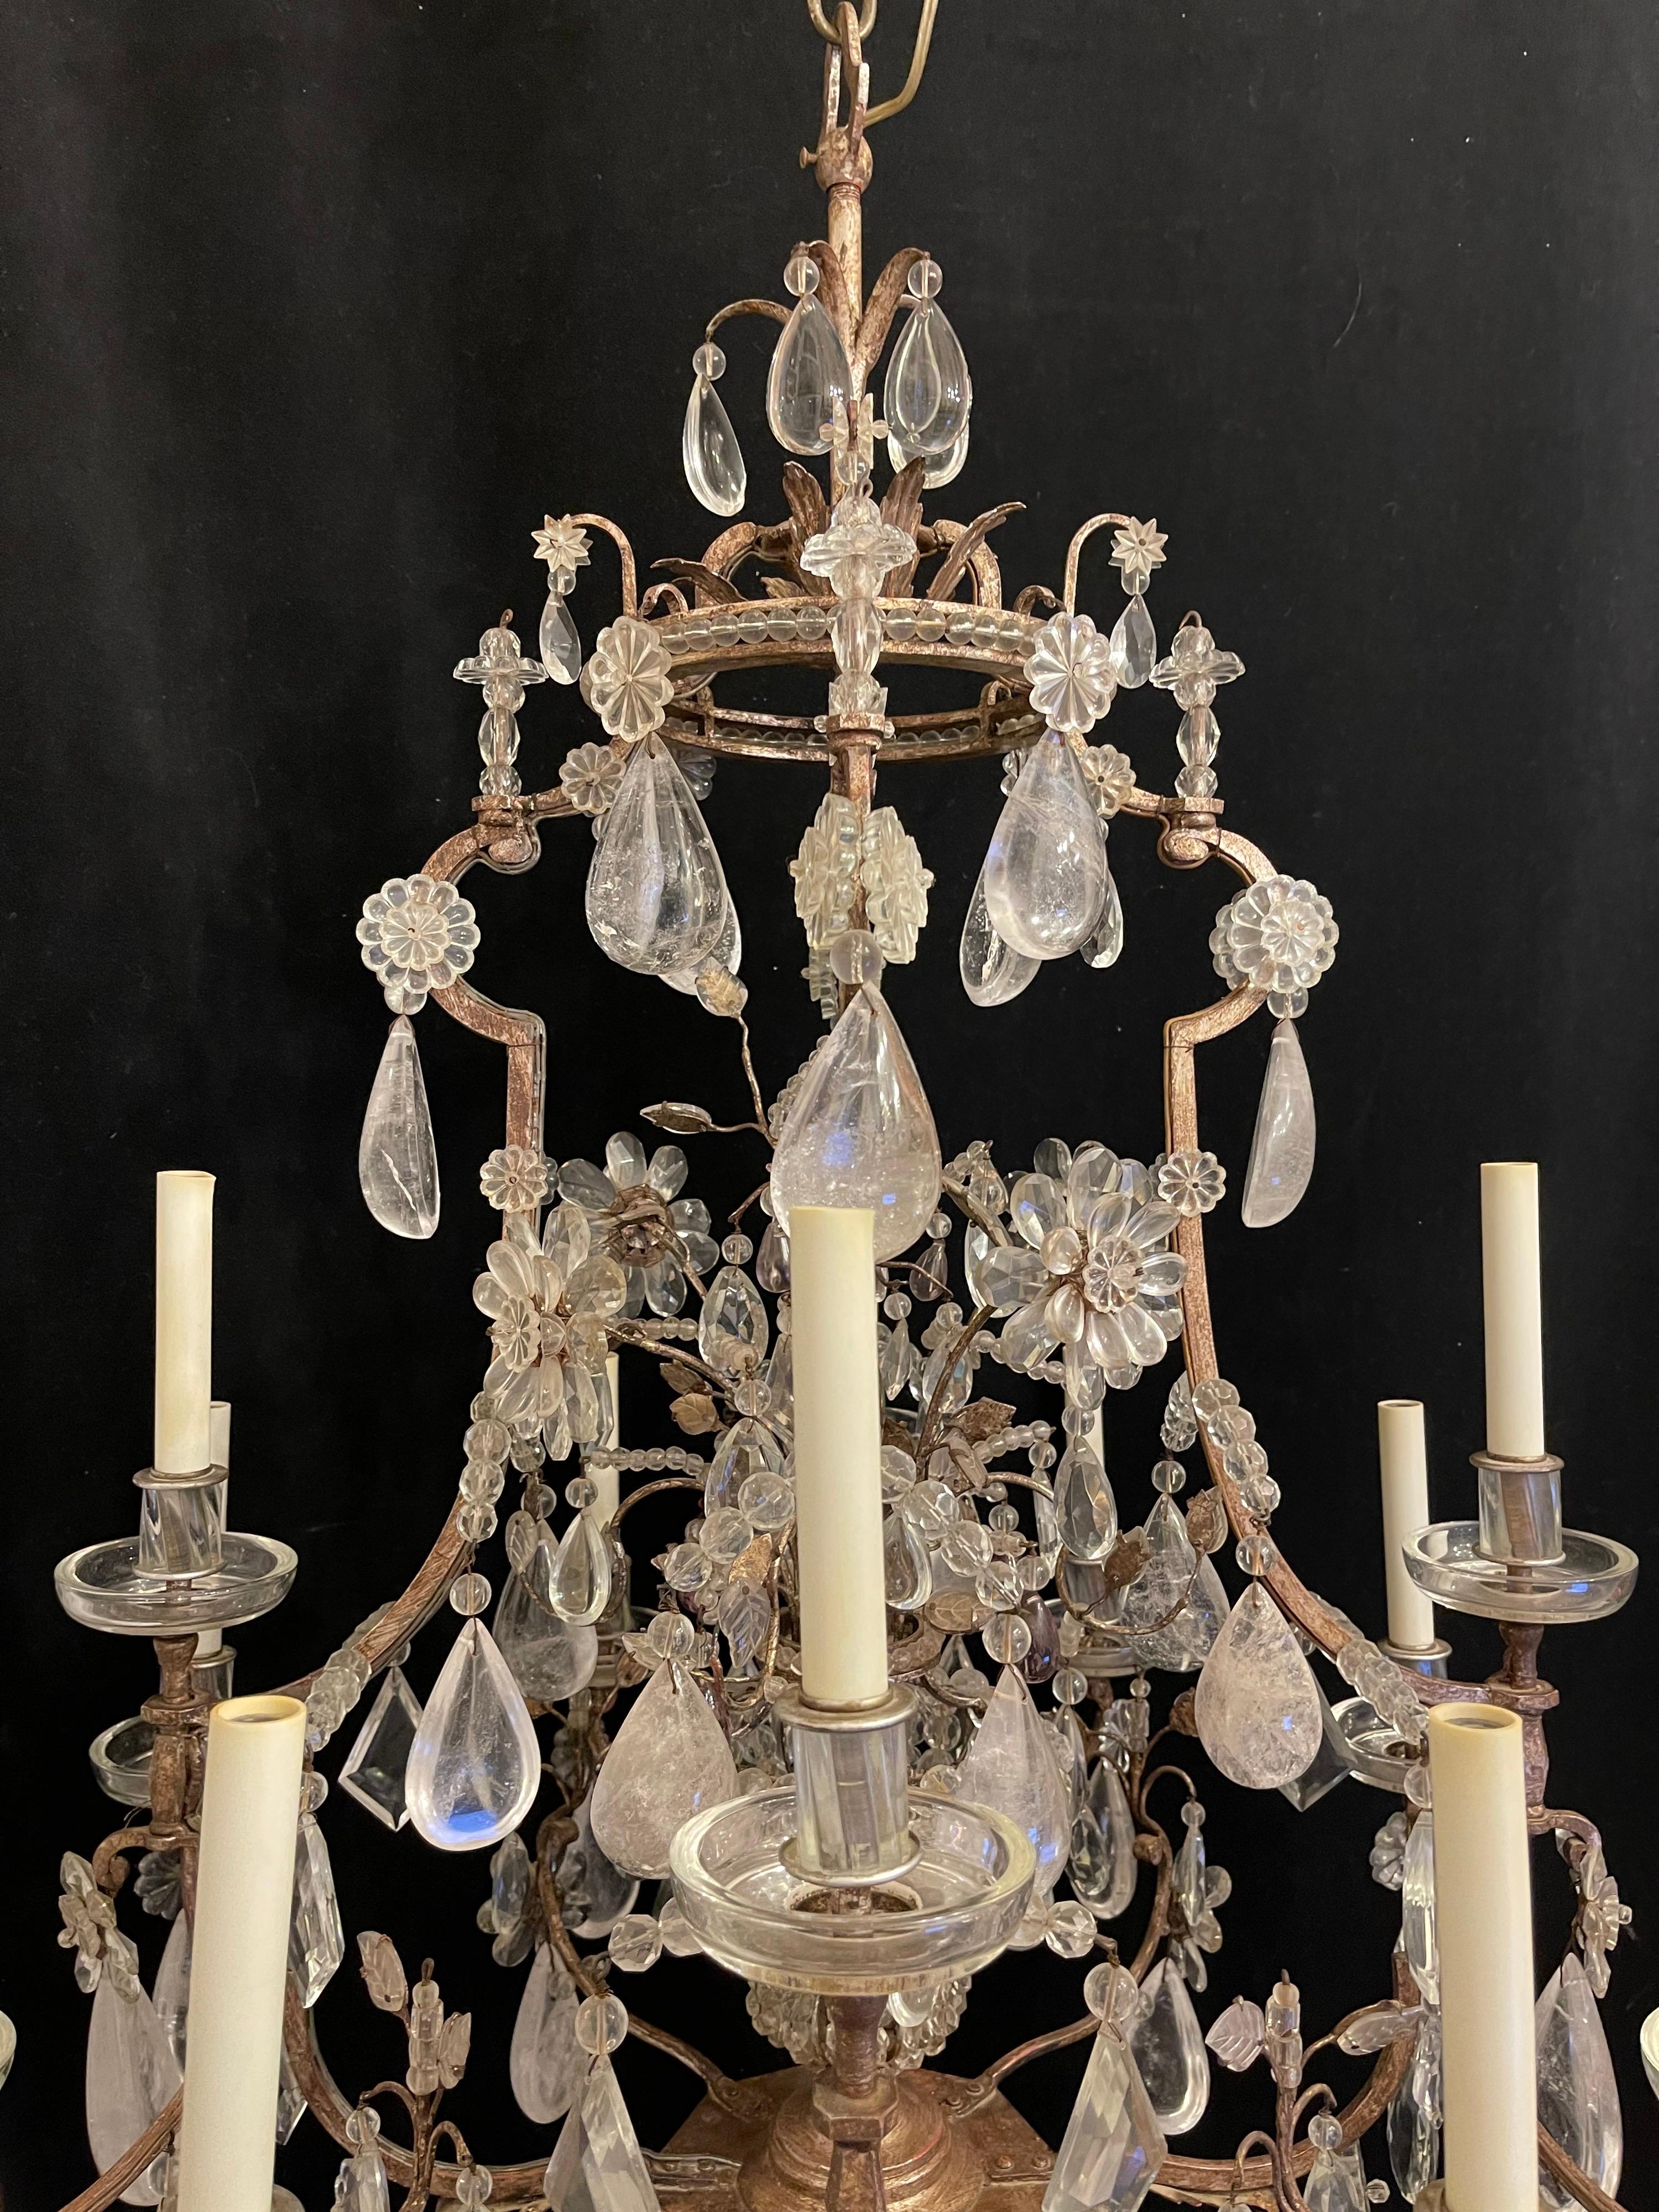 This large scale, stylish and chic rock crystal chandelier was created by the iconic firm of Maison Baguès and is in the Louis XV style with its 12 candle lights and the interior crystal beaded cage has a single bulb. The steel frame is an antique